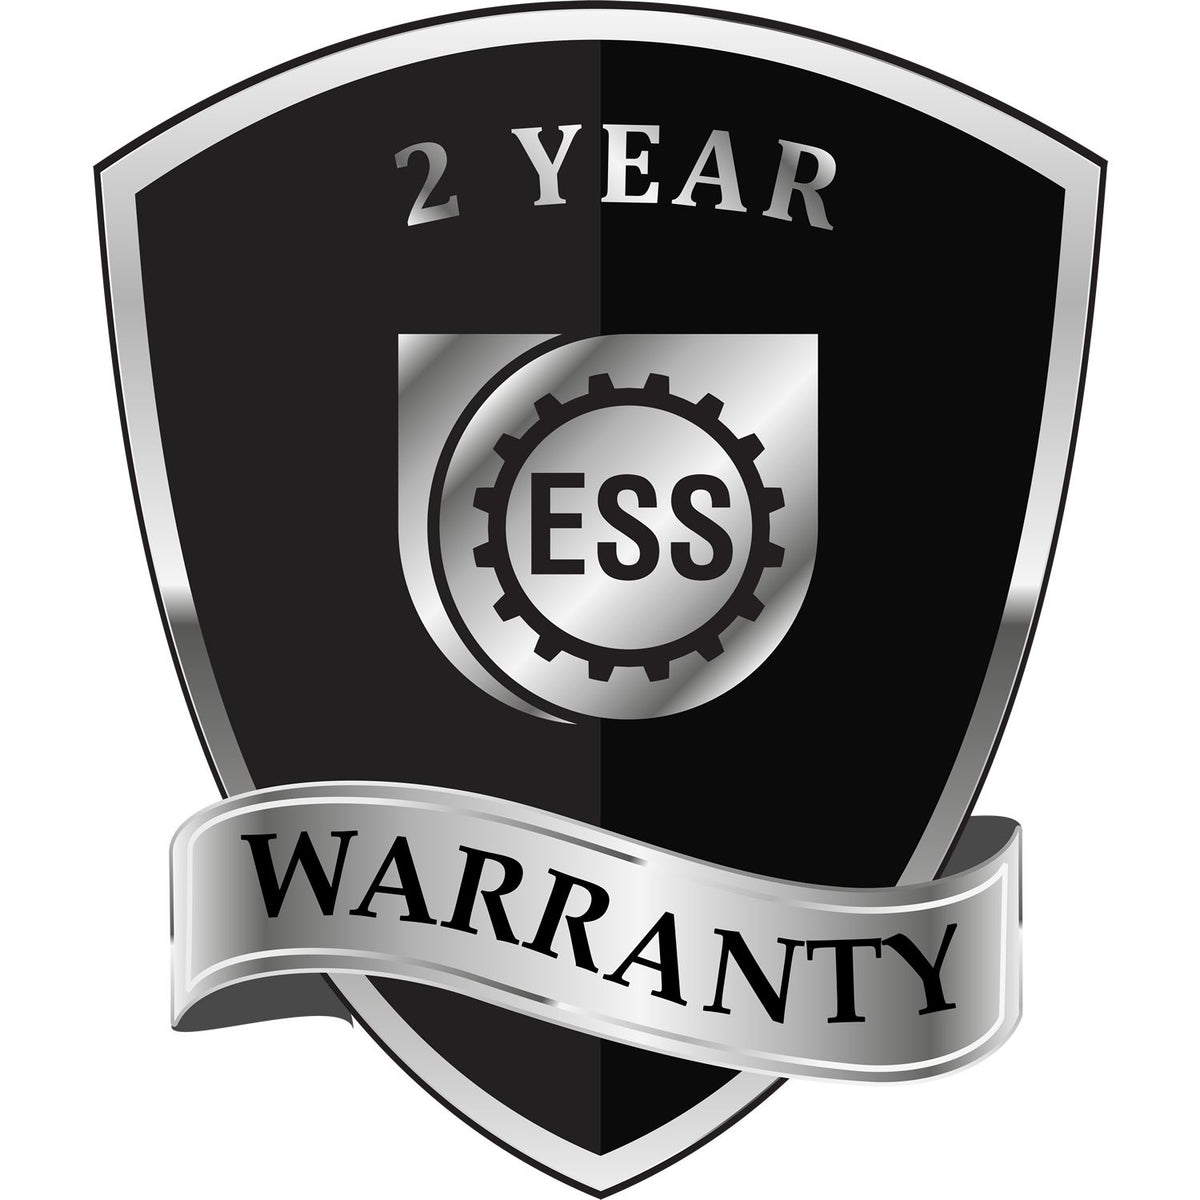 A black and silver badge or emblem showing warranty information for the Gift Vermont Engineer Seal